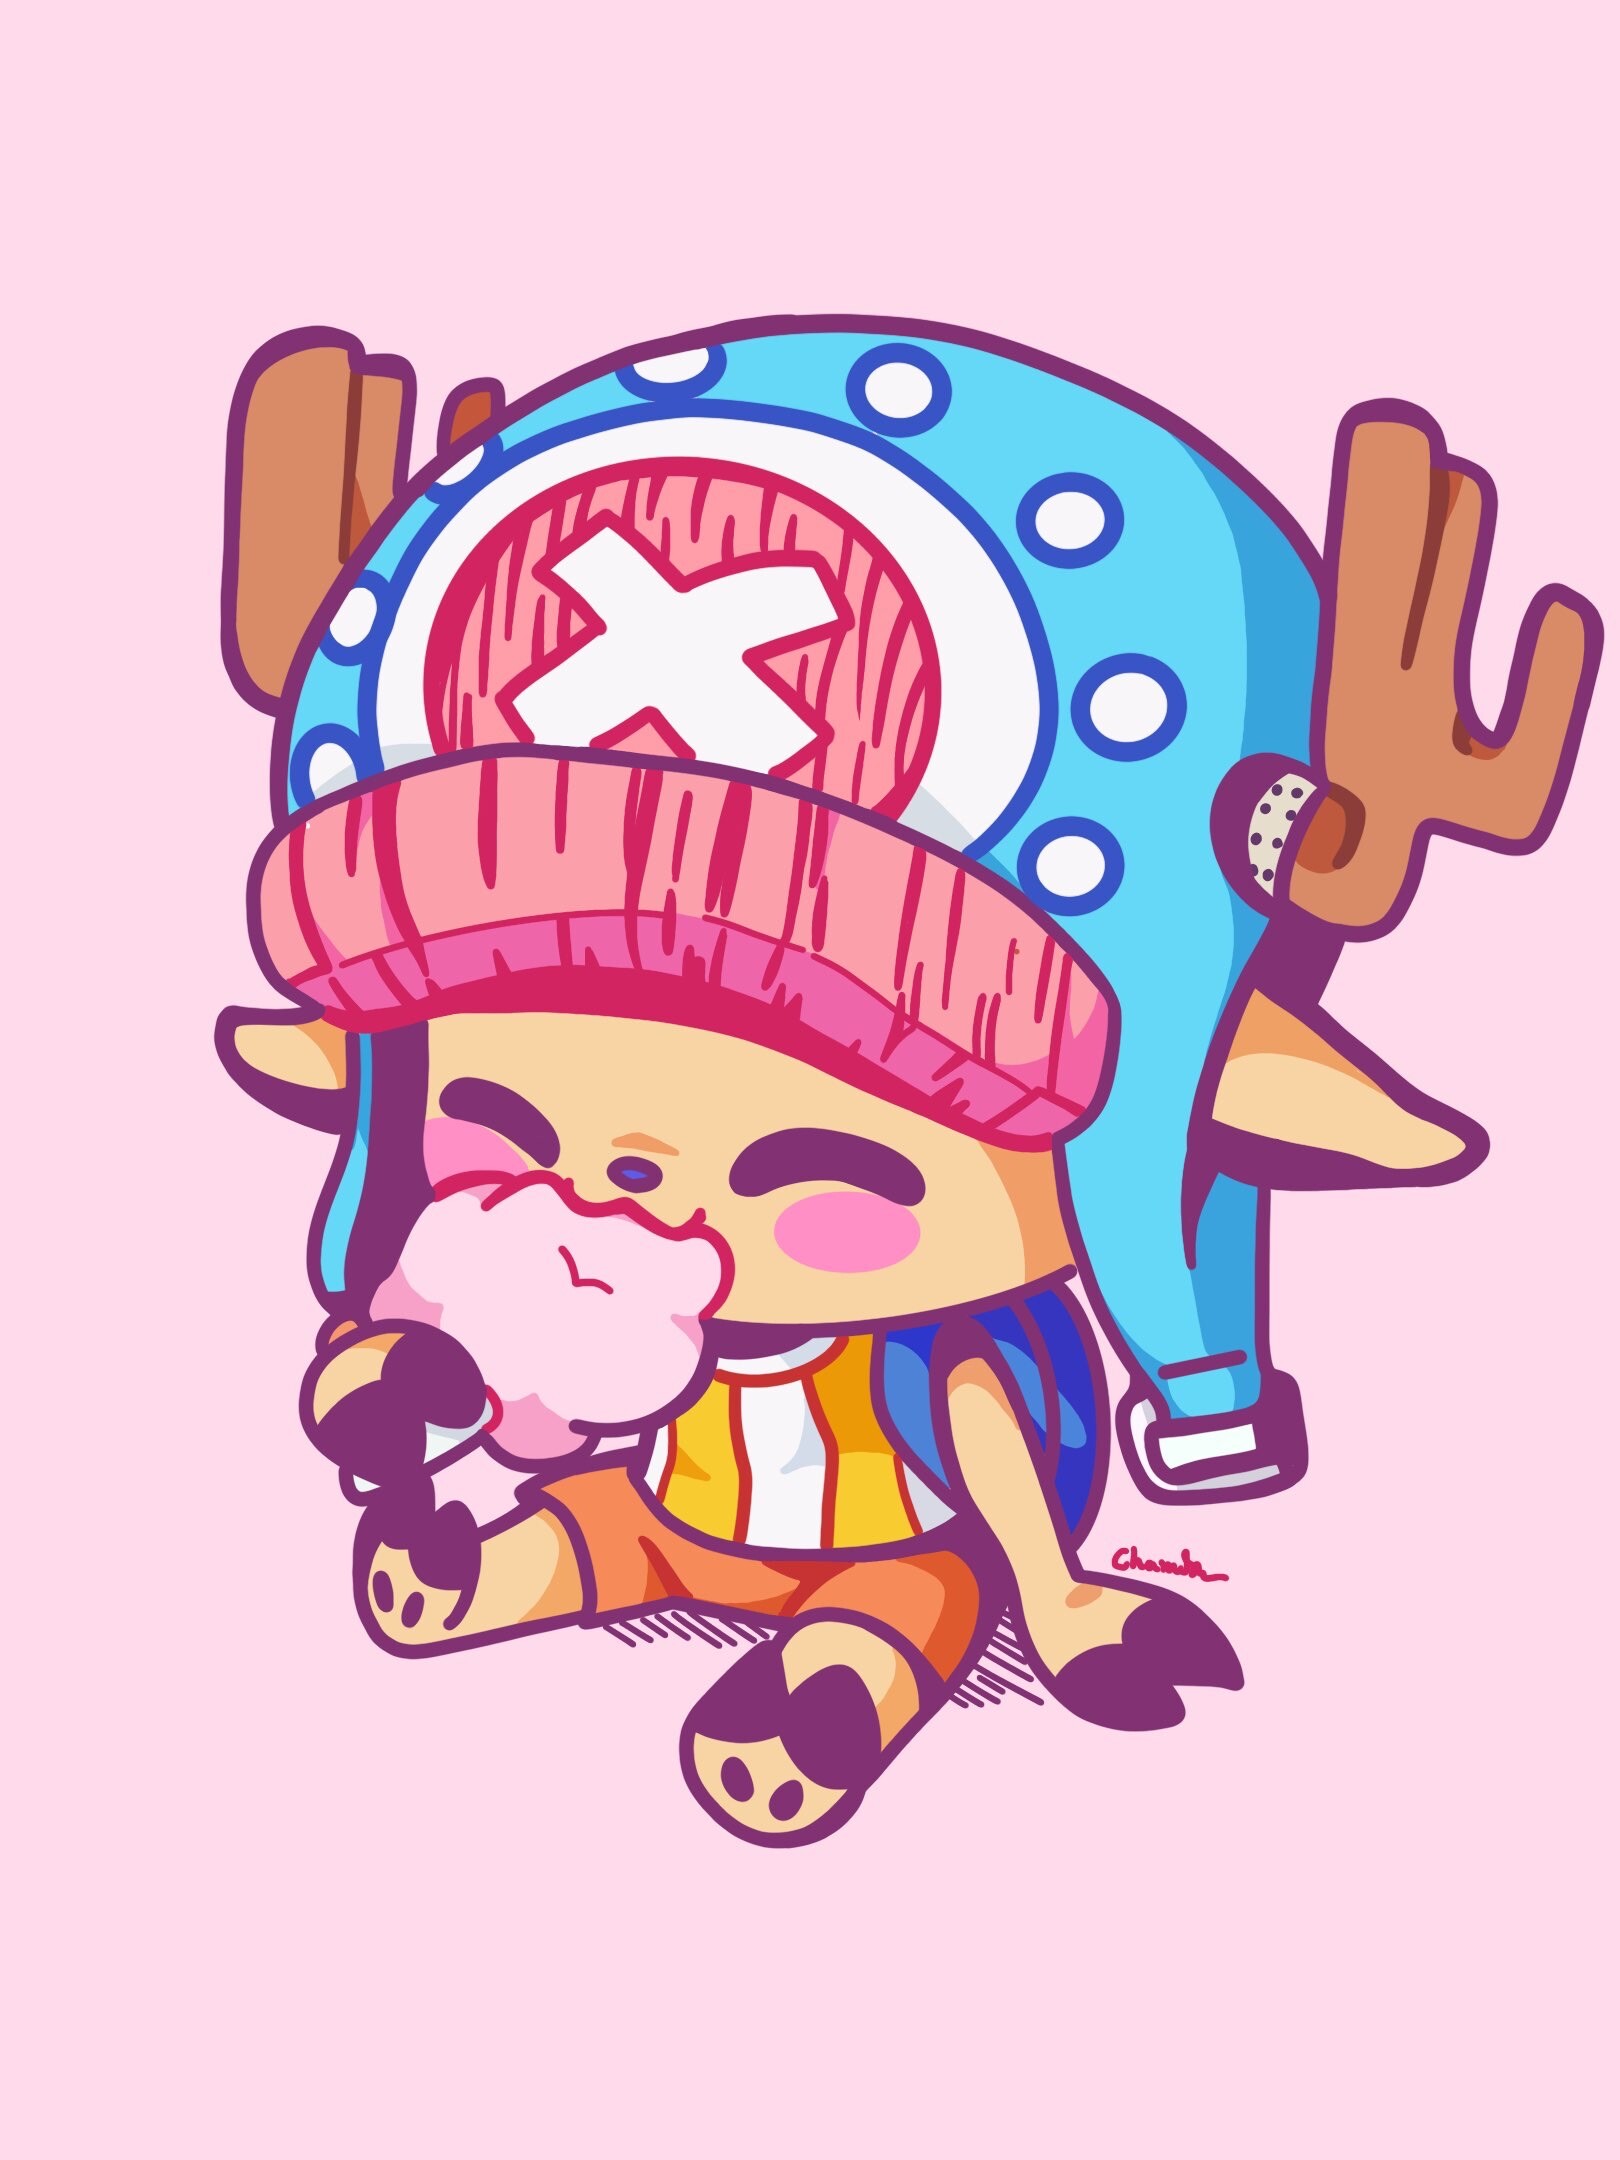 Chopper from one piece by Ms.Sushi on ArtStation. 